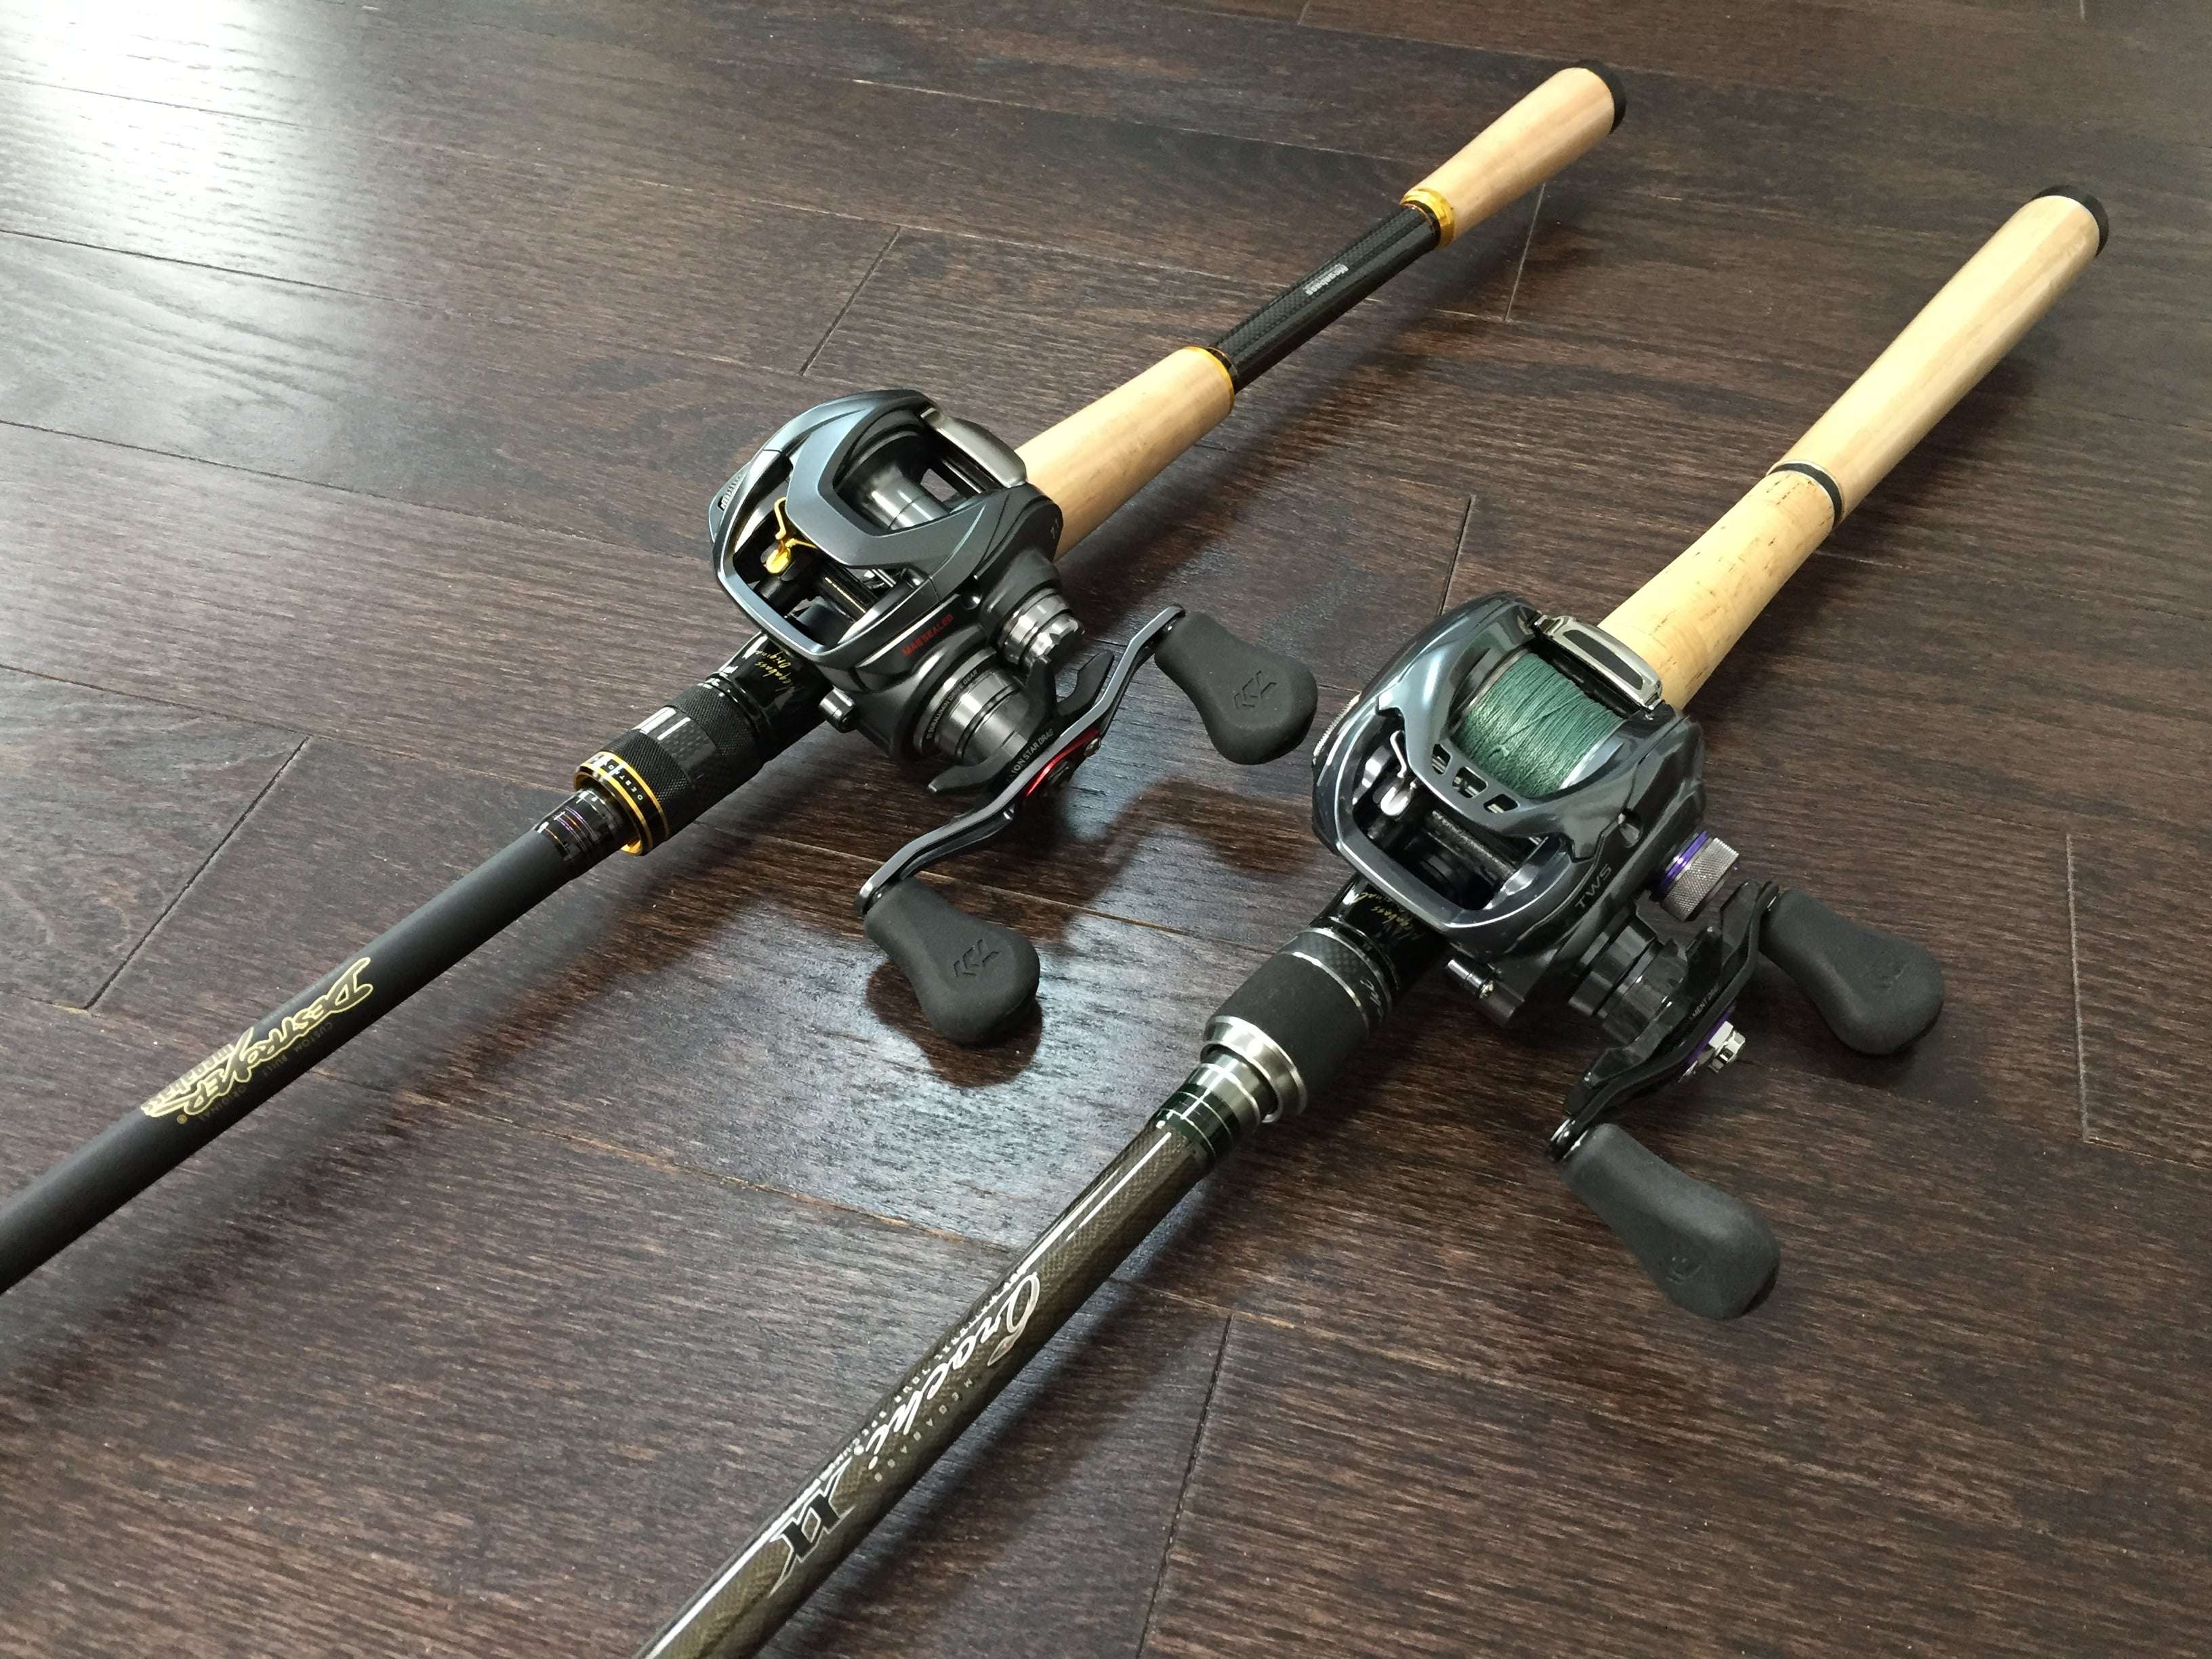 Latest rod/reel pairings - Page 2 - The Classic Fly Rod Forum